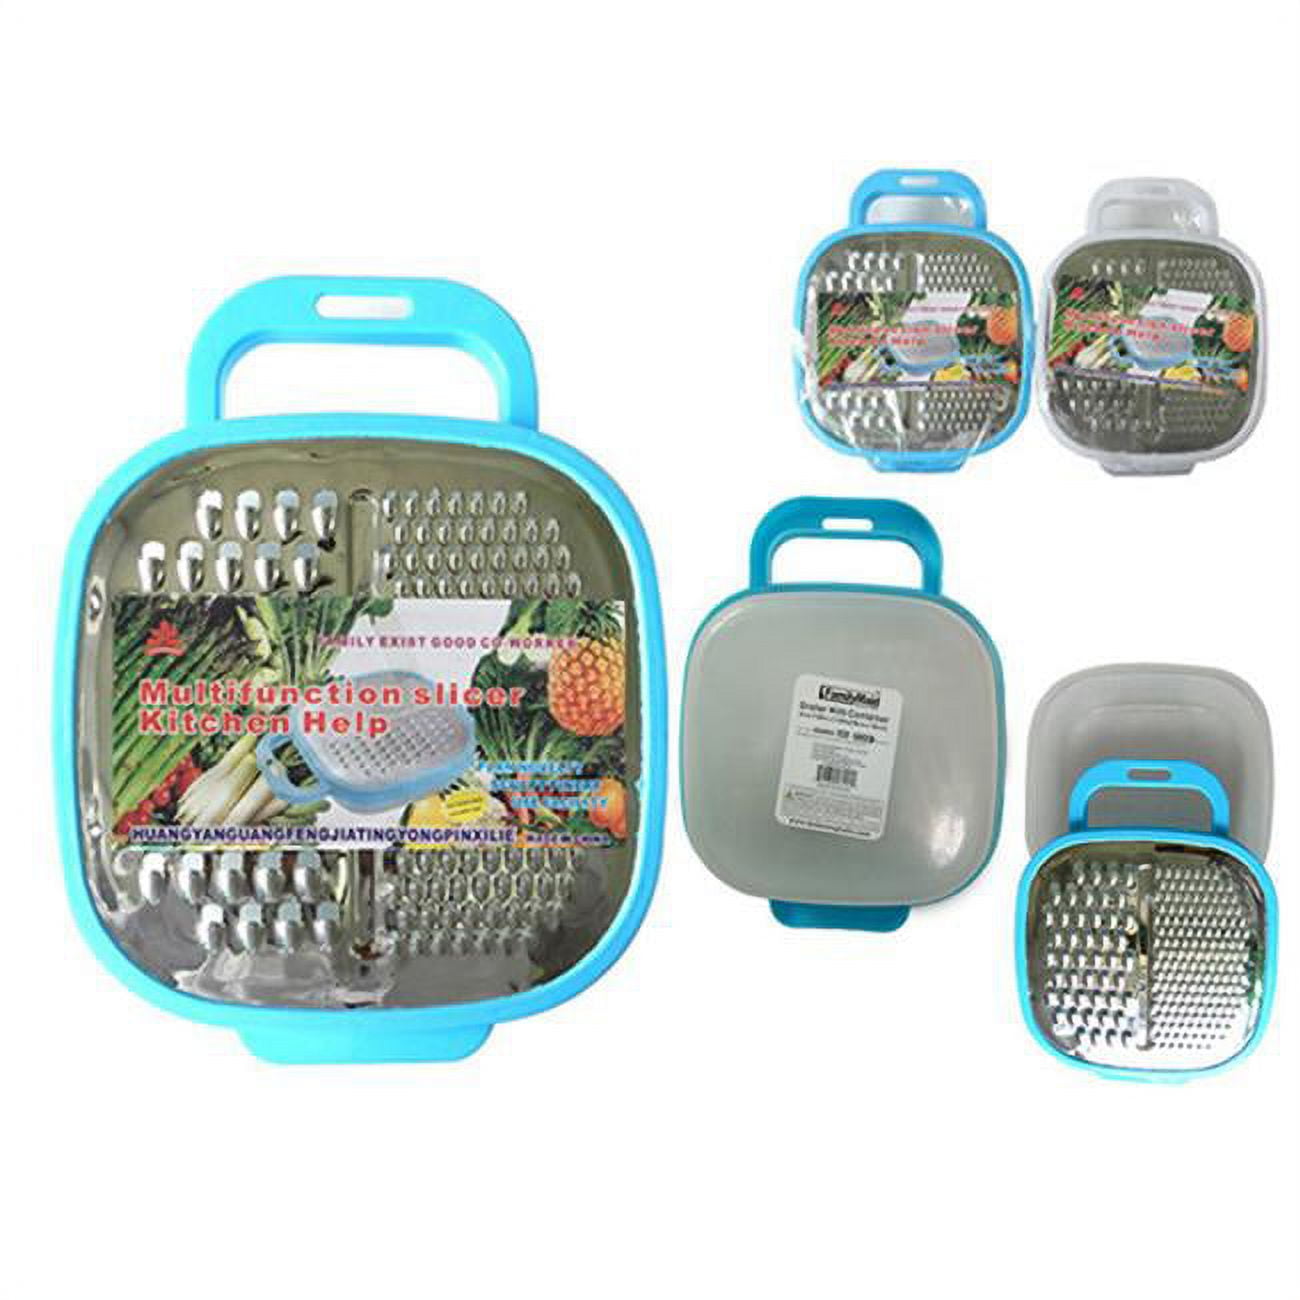 Picture of Familymaid 13145 7.1 x 7.1 in. Grater with Plastic Container - Pack of 60